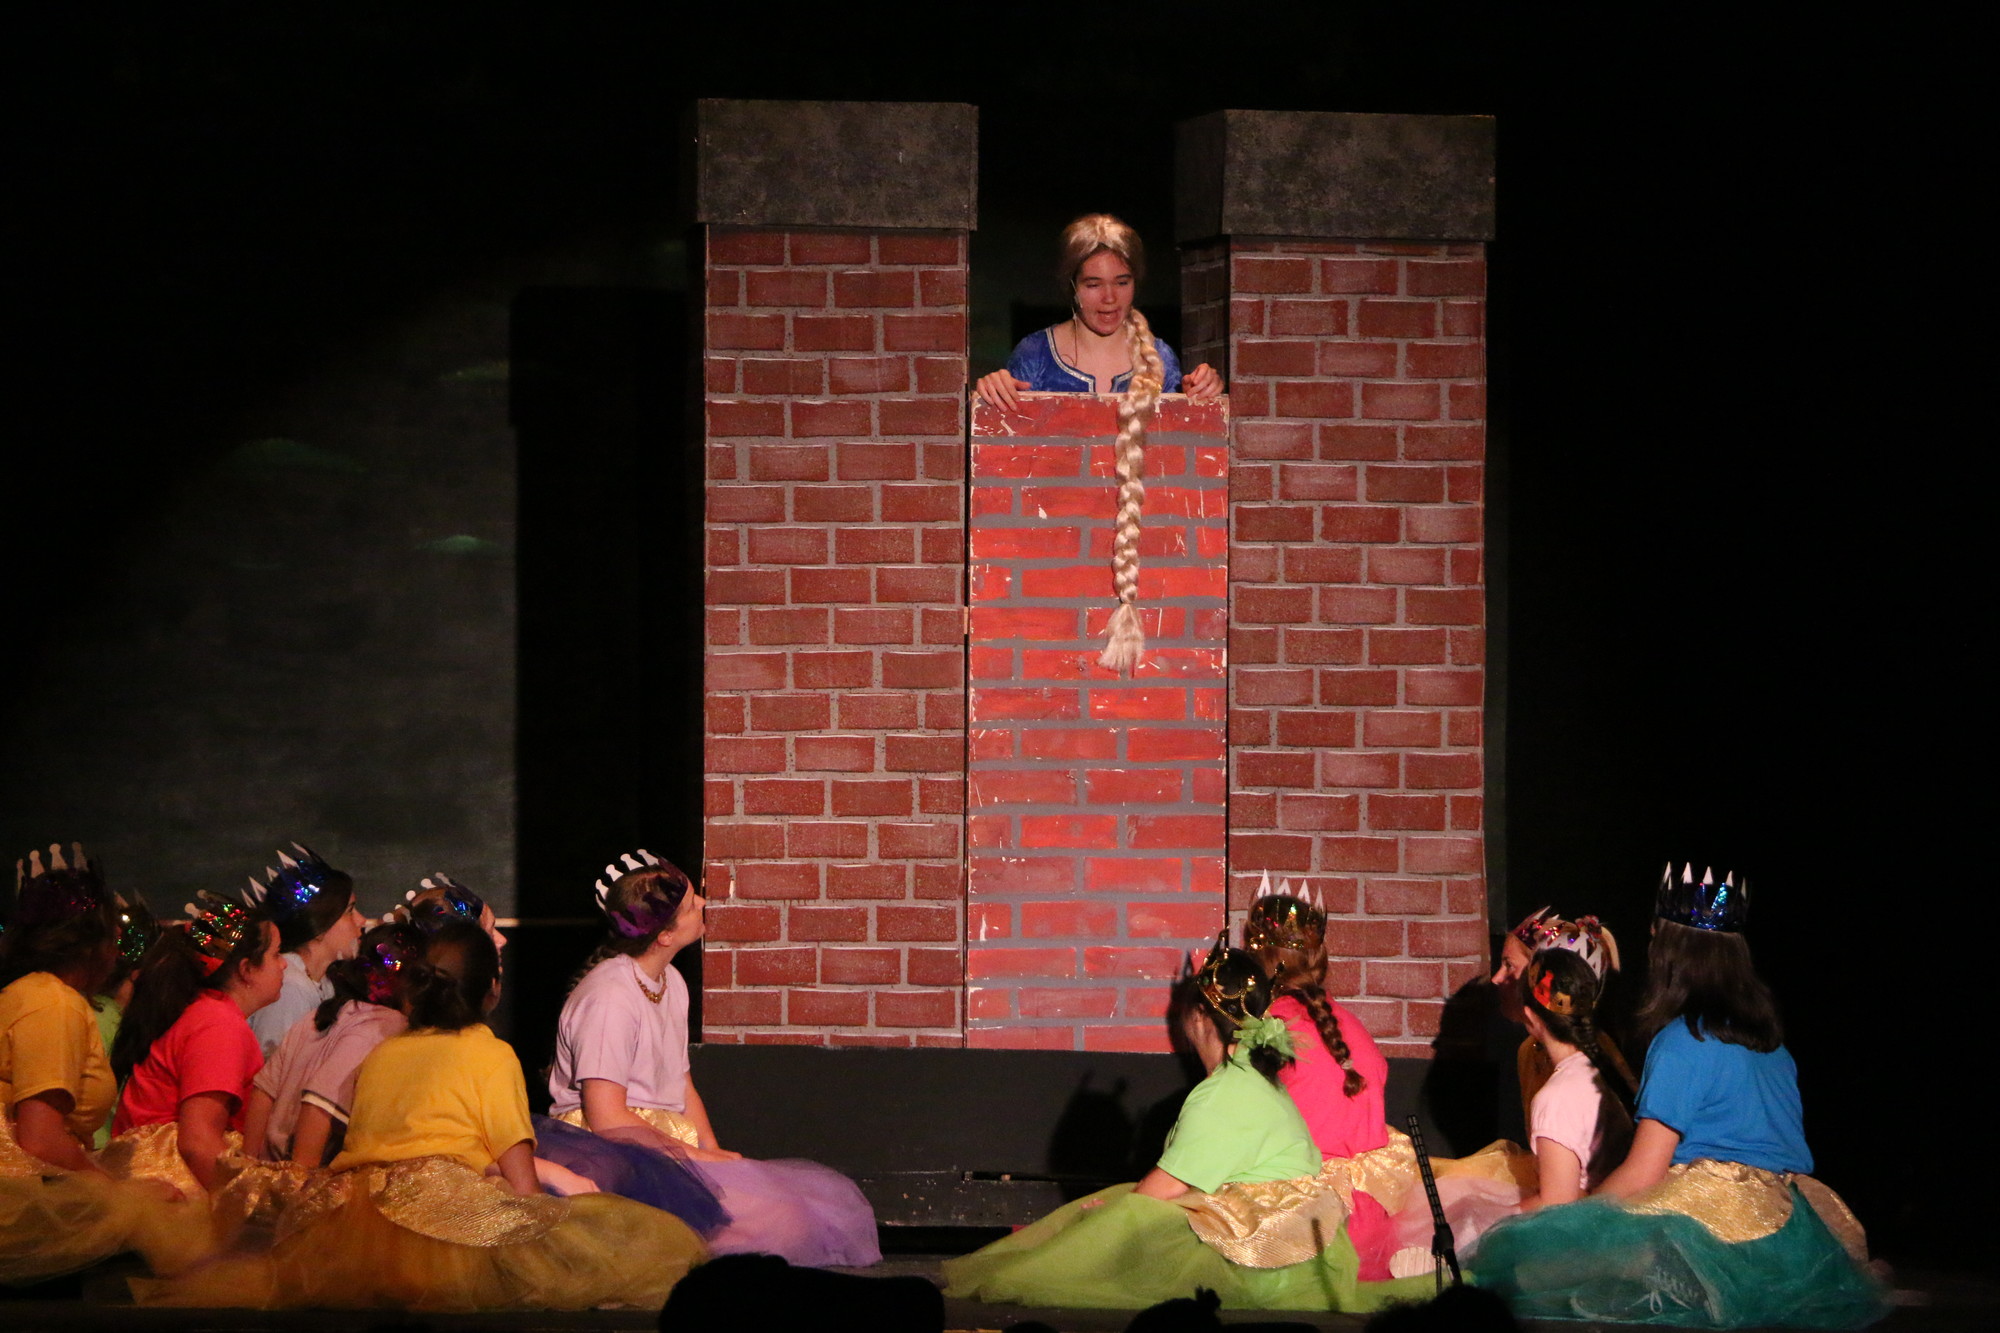 Rapunzel, played by Kyra Ganci-Barnes, sang to fellow princesses about being trapped in a tower.